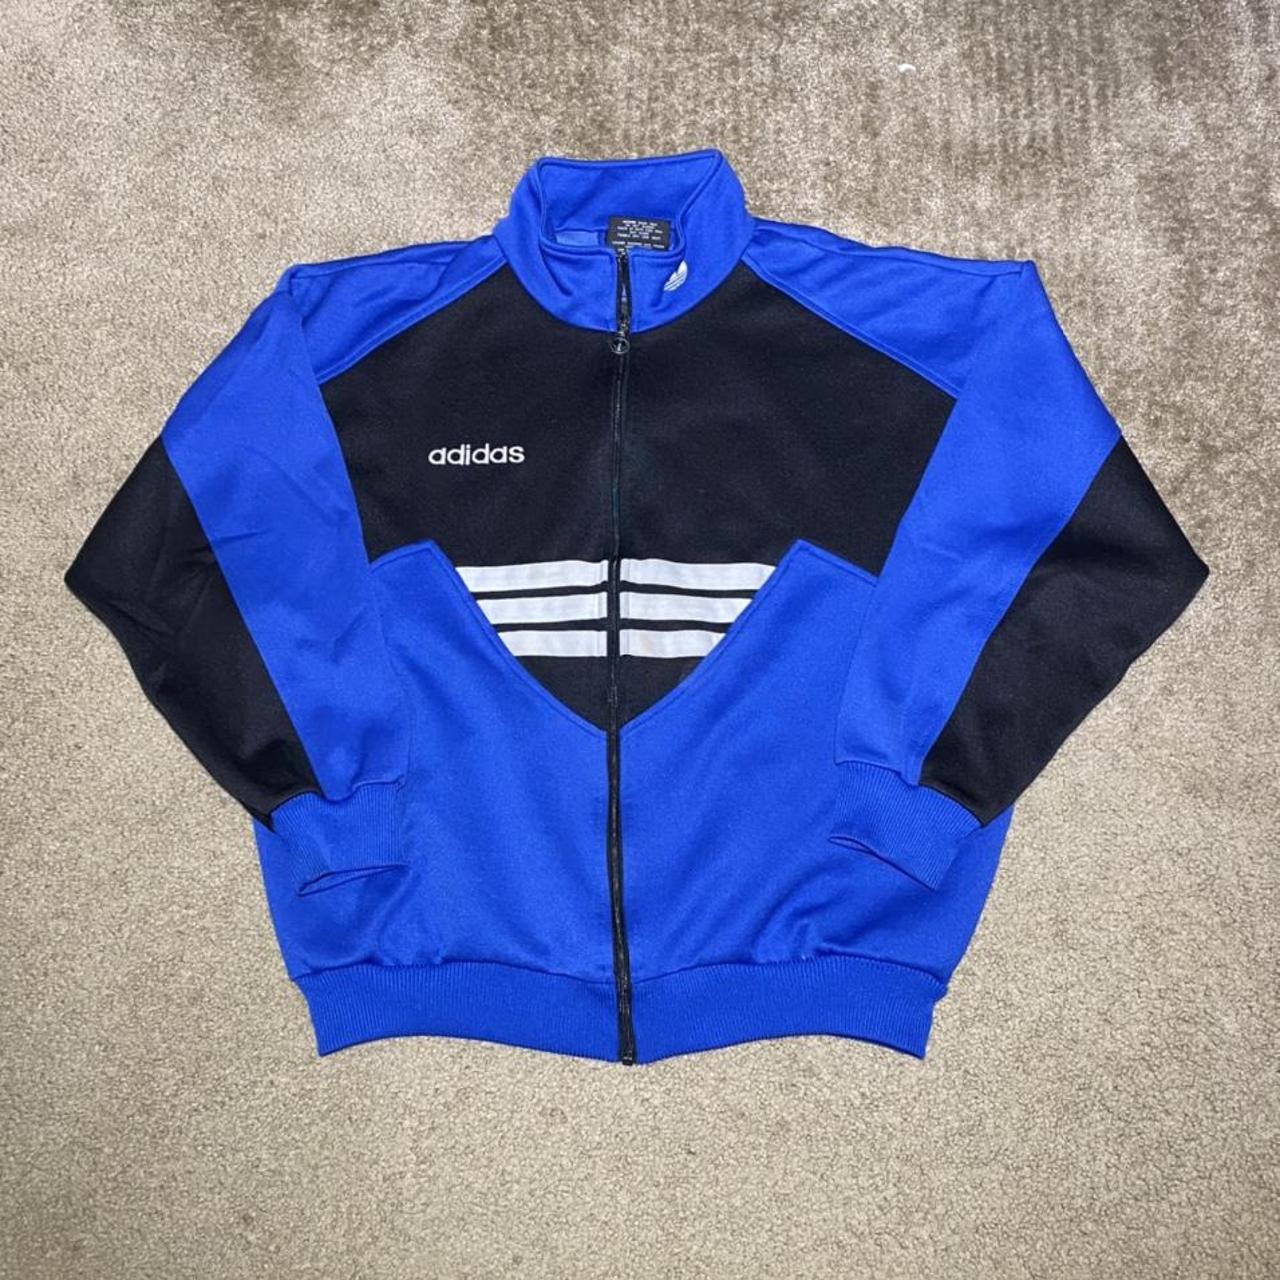 Vintage 1990s Adidas Embroidered Logo Spell Out Full... - Depop